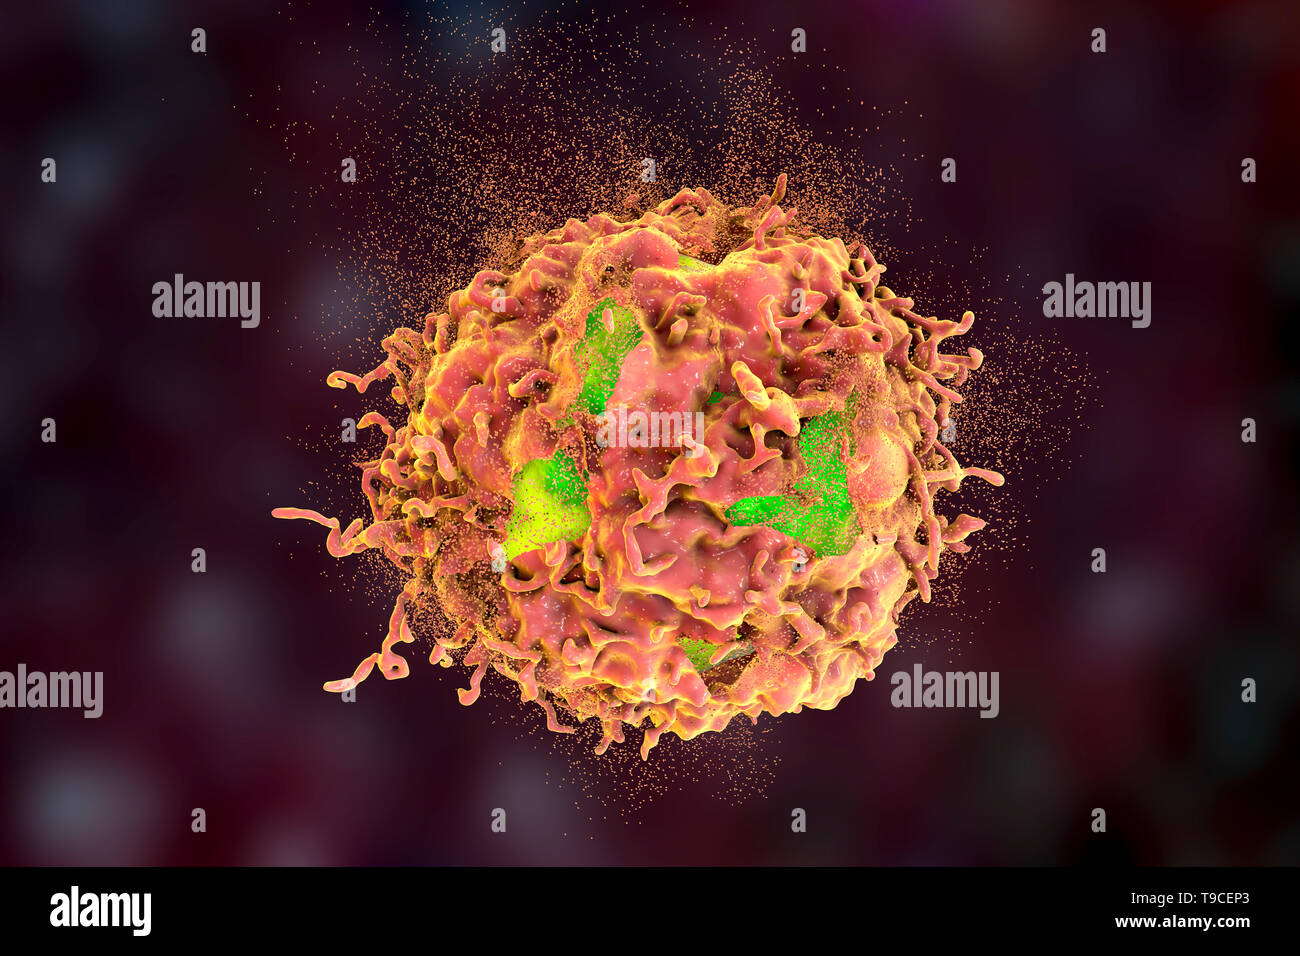 Destruction of a cancer cell, illustration Stock Photo